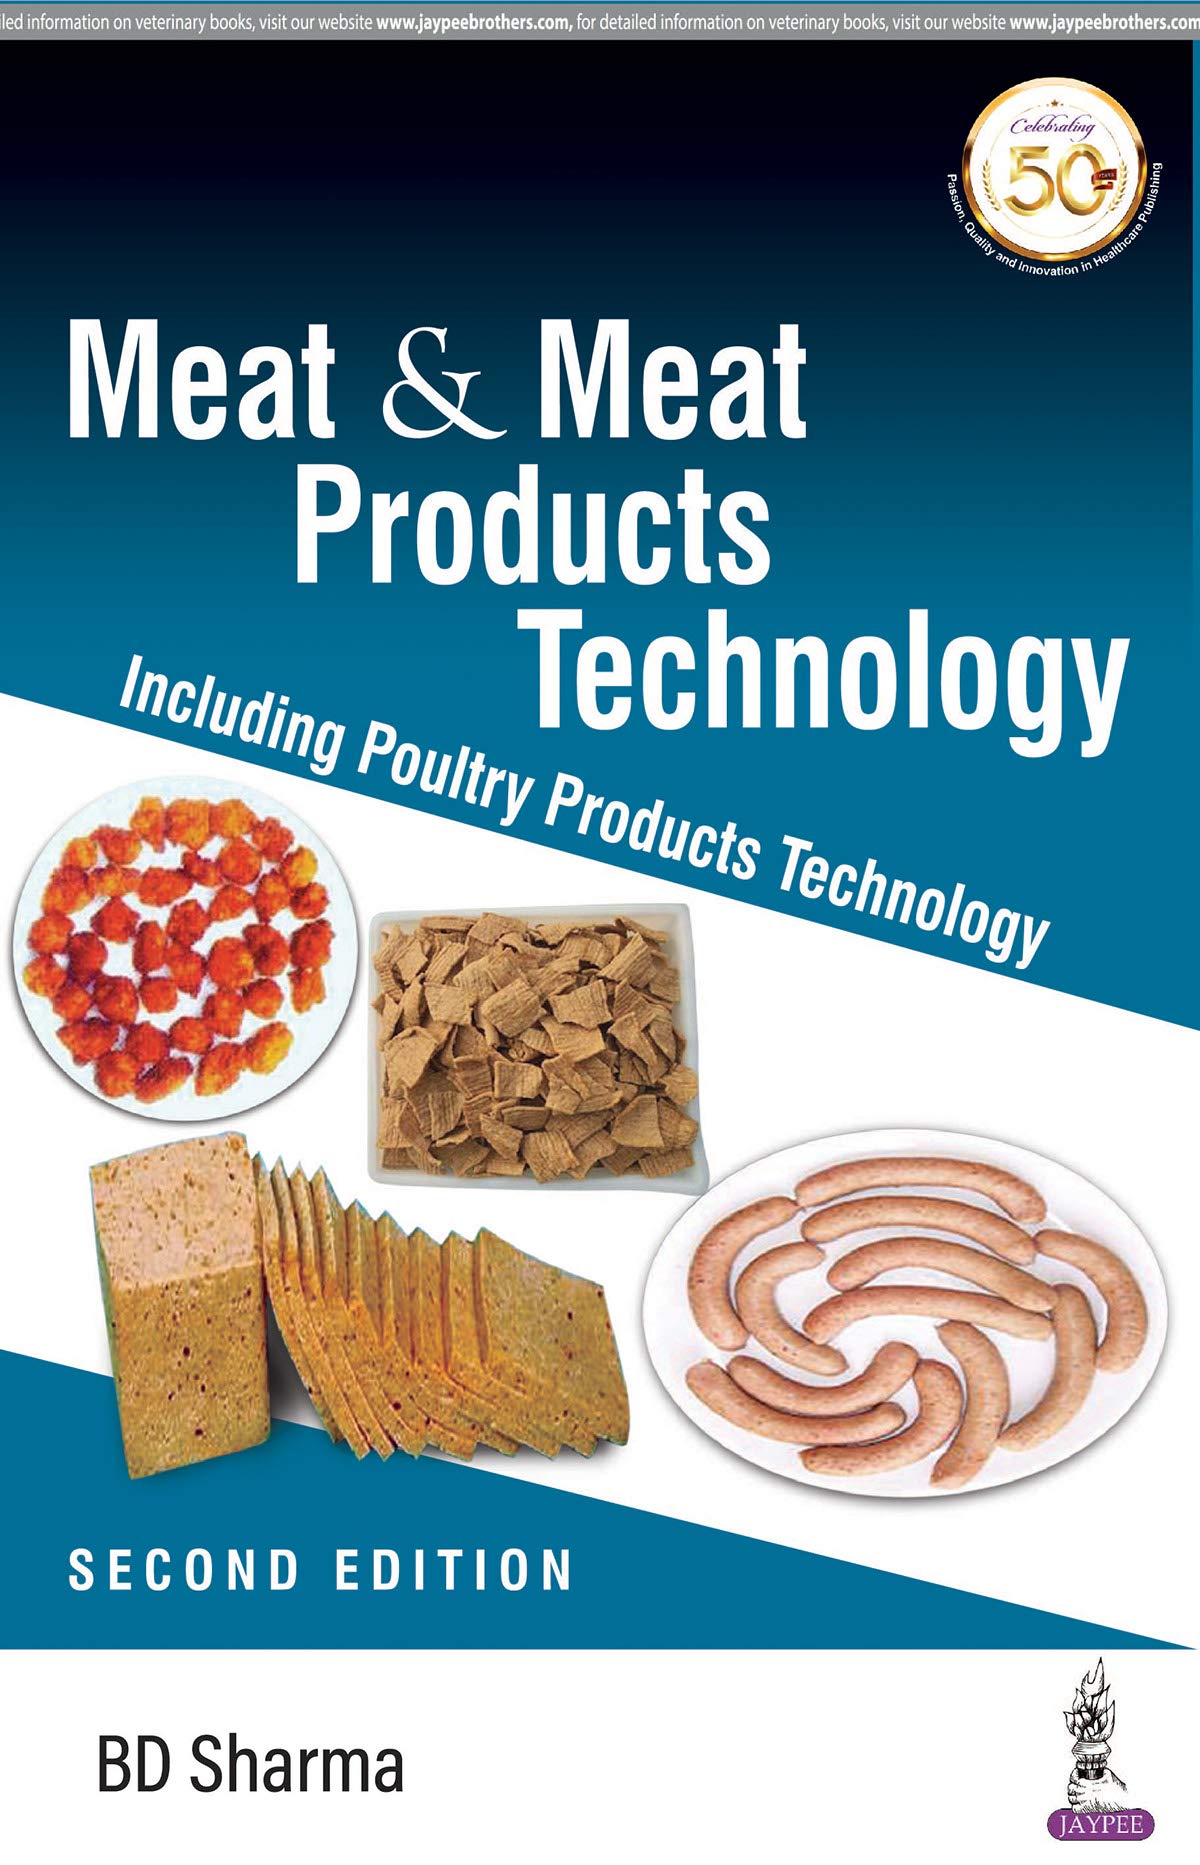 Meat & Meat Products Technology Including Poultry Products Technology
